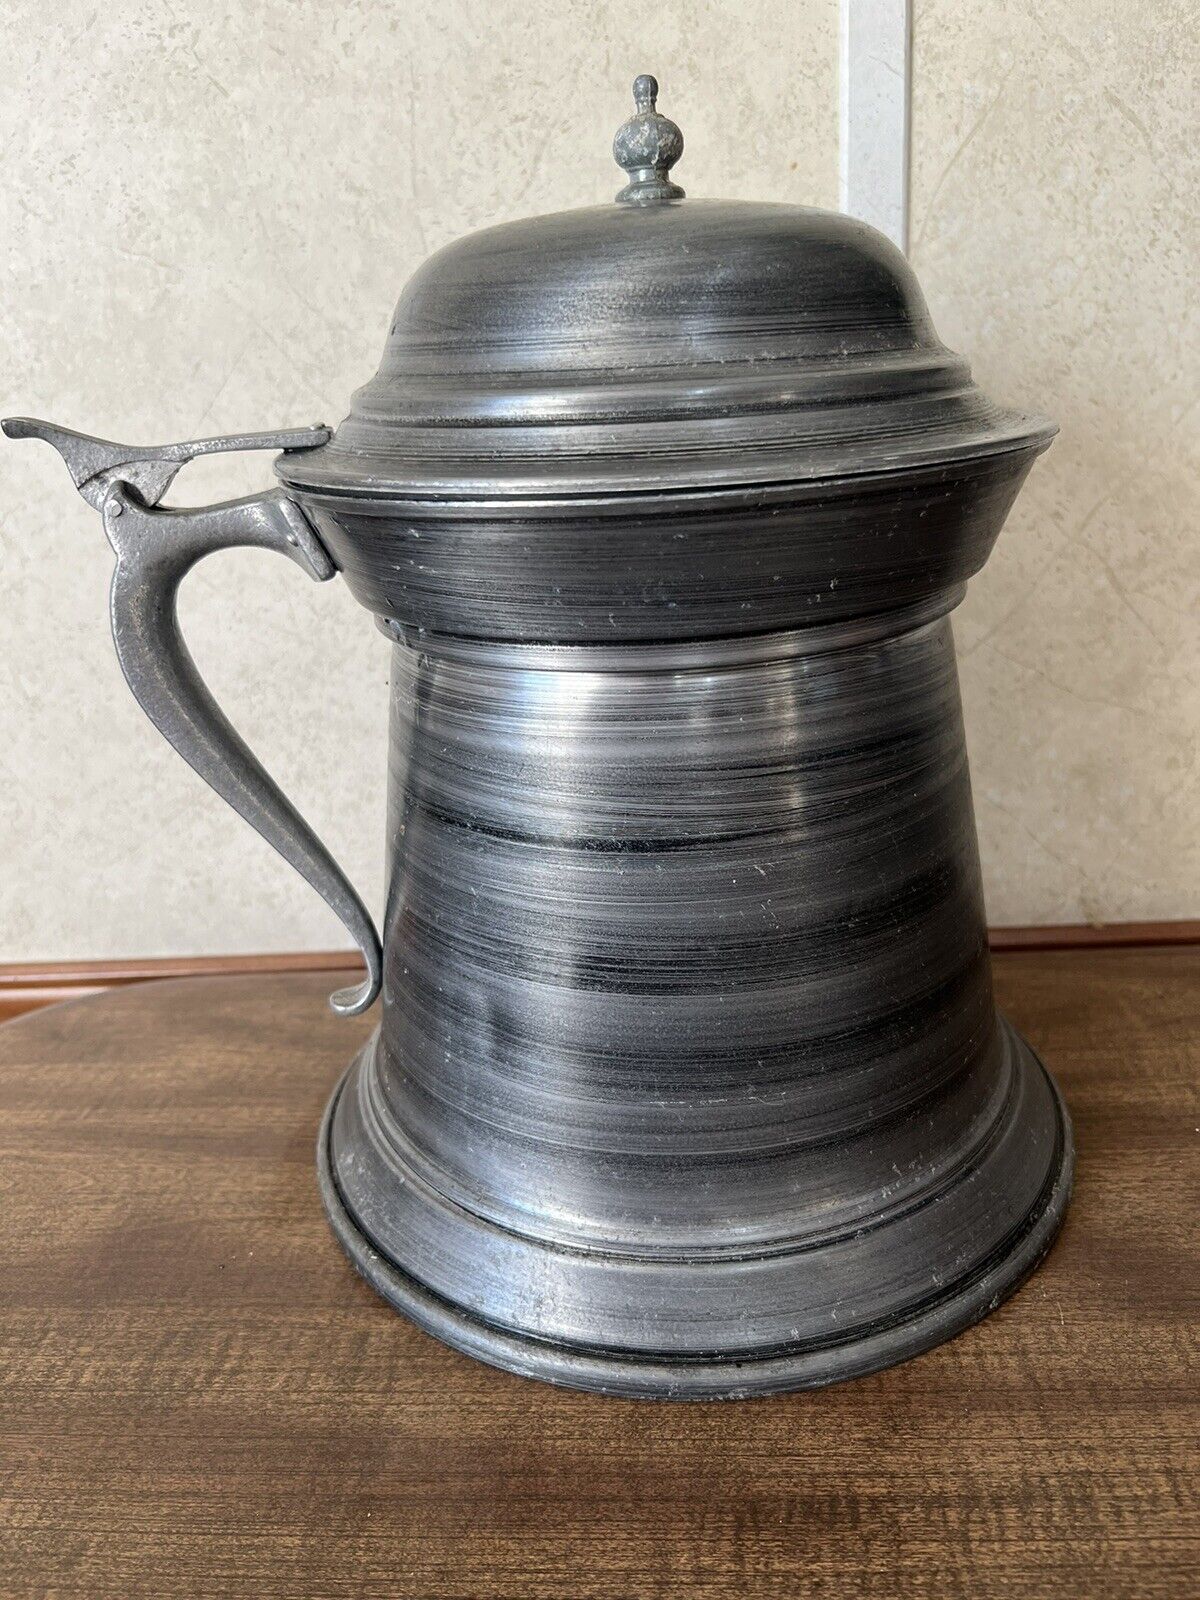 Vintage ENORMOUS GIANT BEER STEIN (Ice Bucket) Aluminum Pewter  Color Insulated